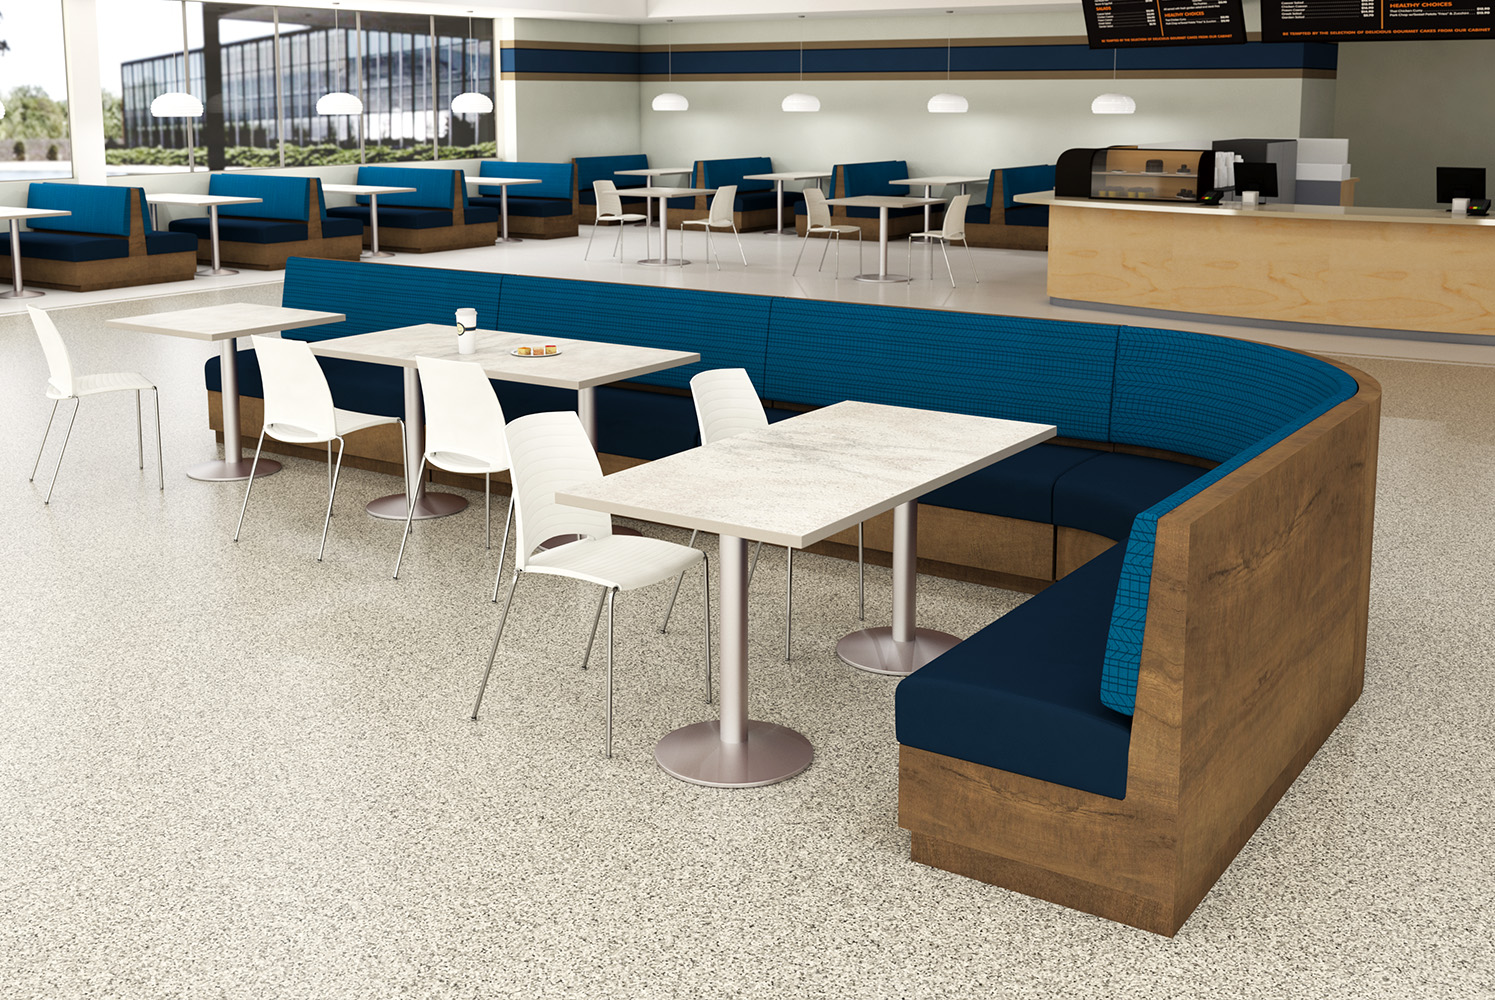 Verona banquettes, Corsa tables and Gobi chairs Cafeteria Scene